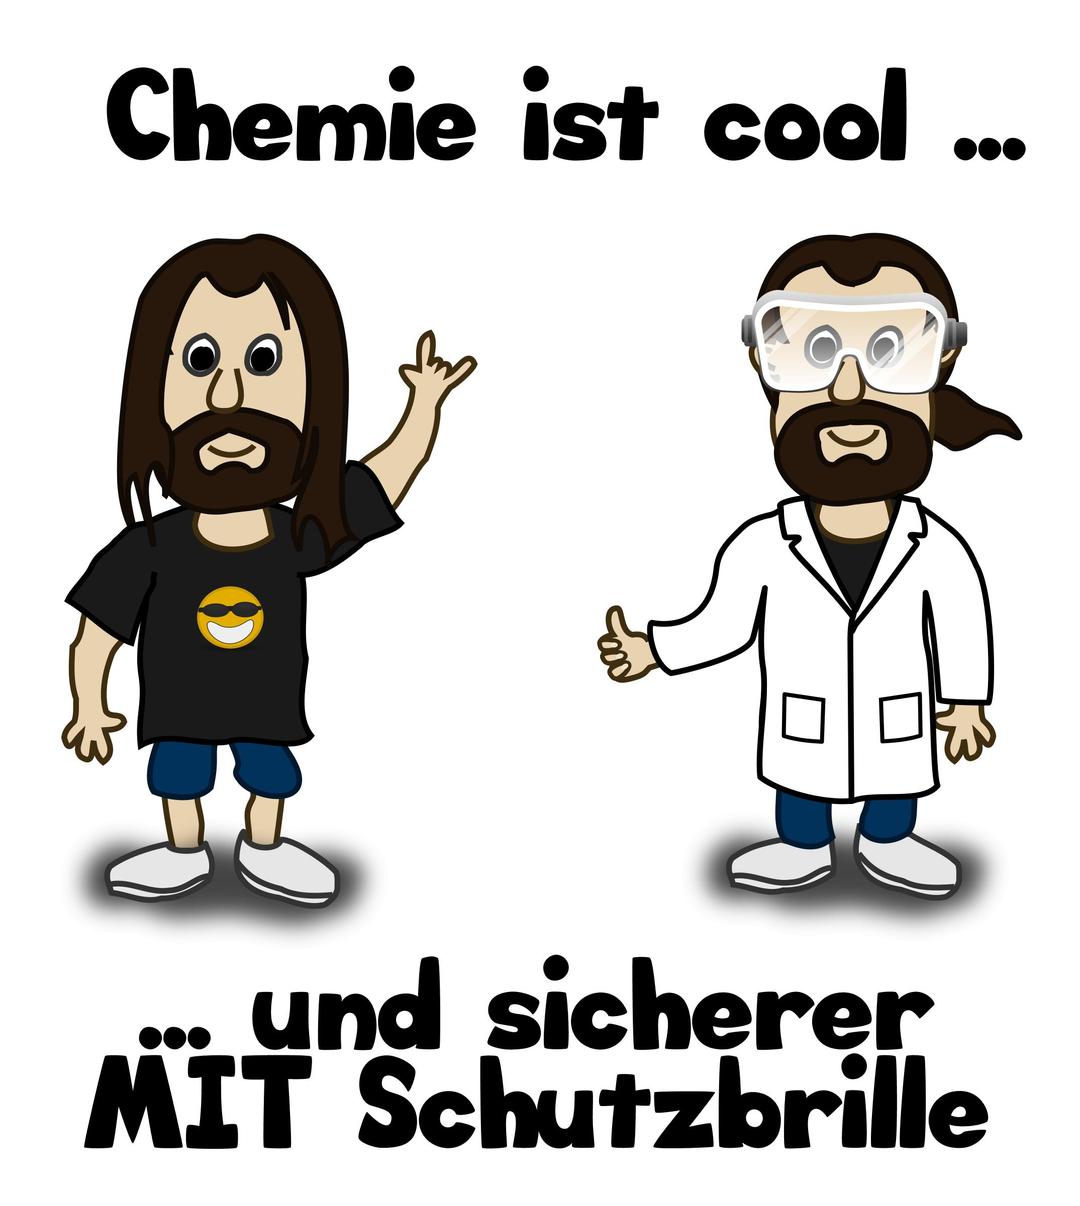 Chemie-Promo - Chemie ist cool png transparent